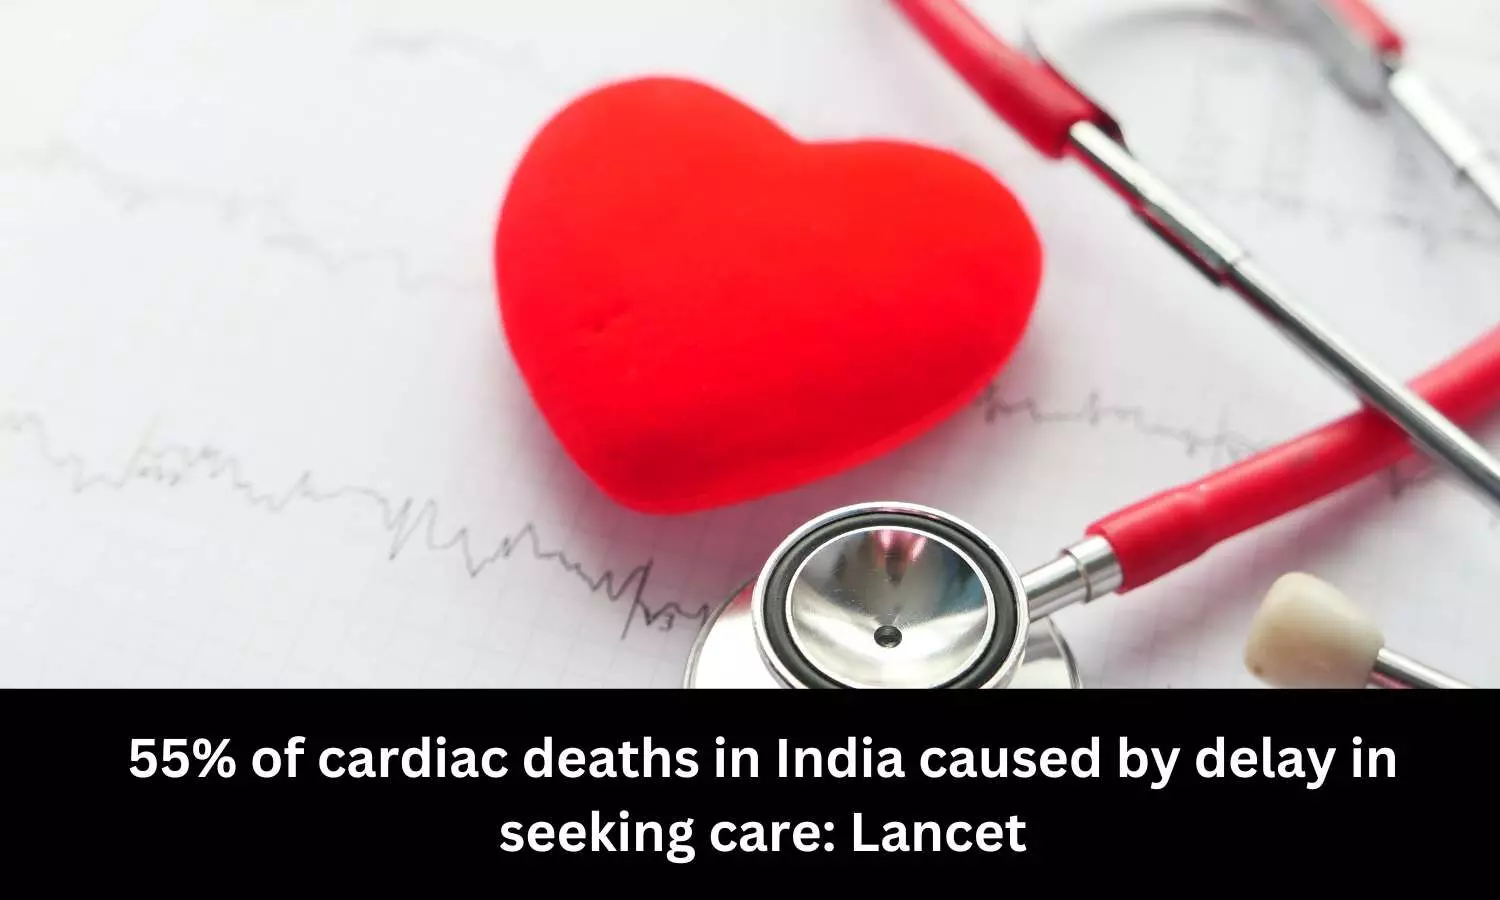 55 percent of cardiac deaths in India caused by delay in seeking care: Lancet